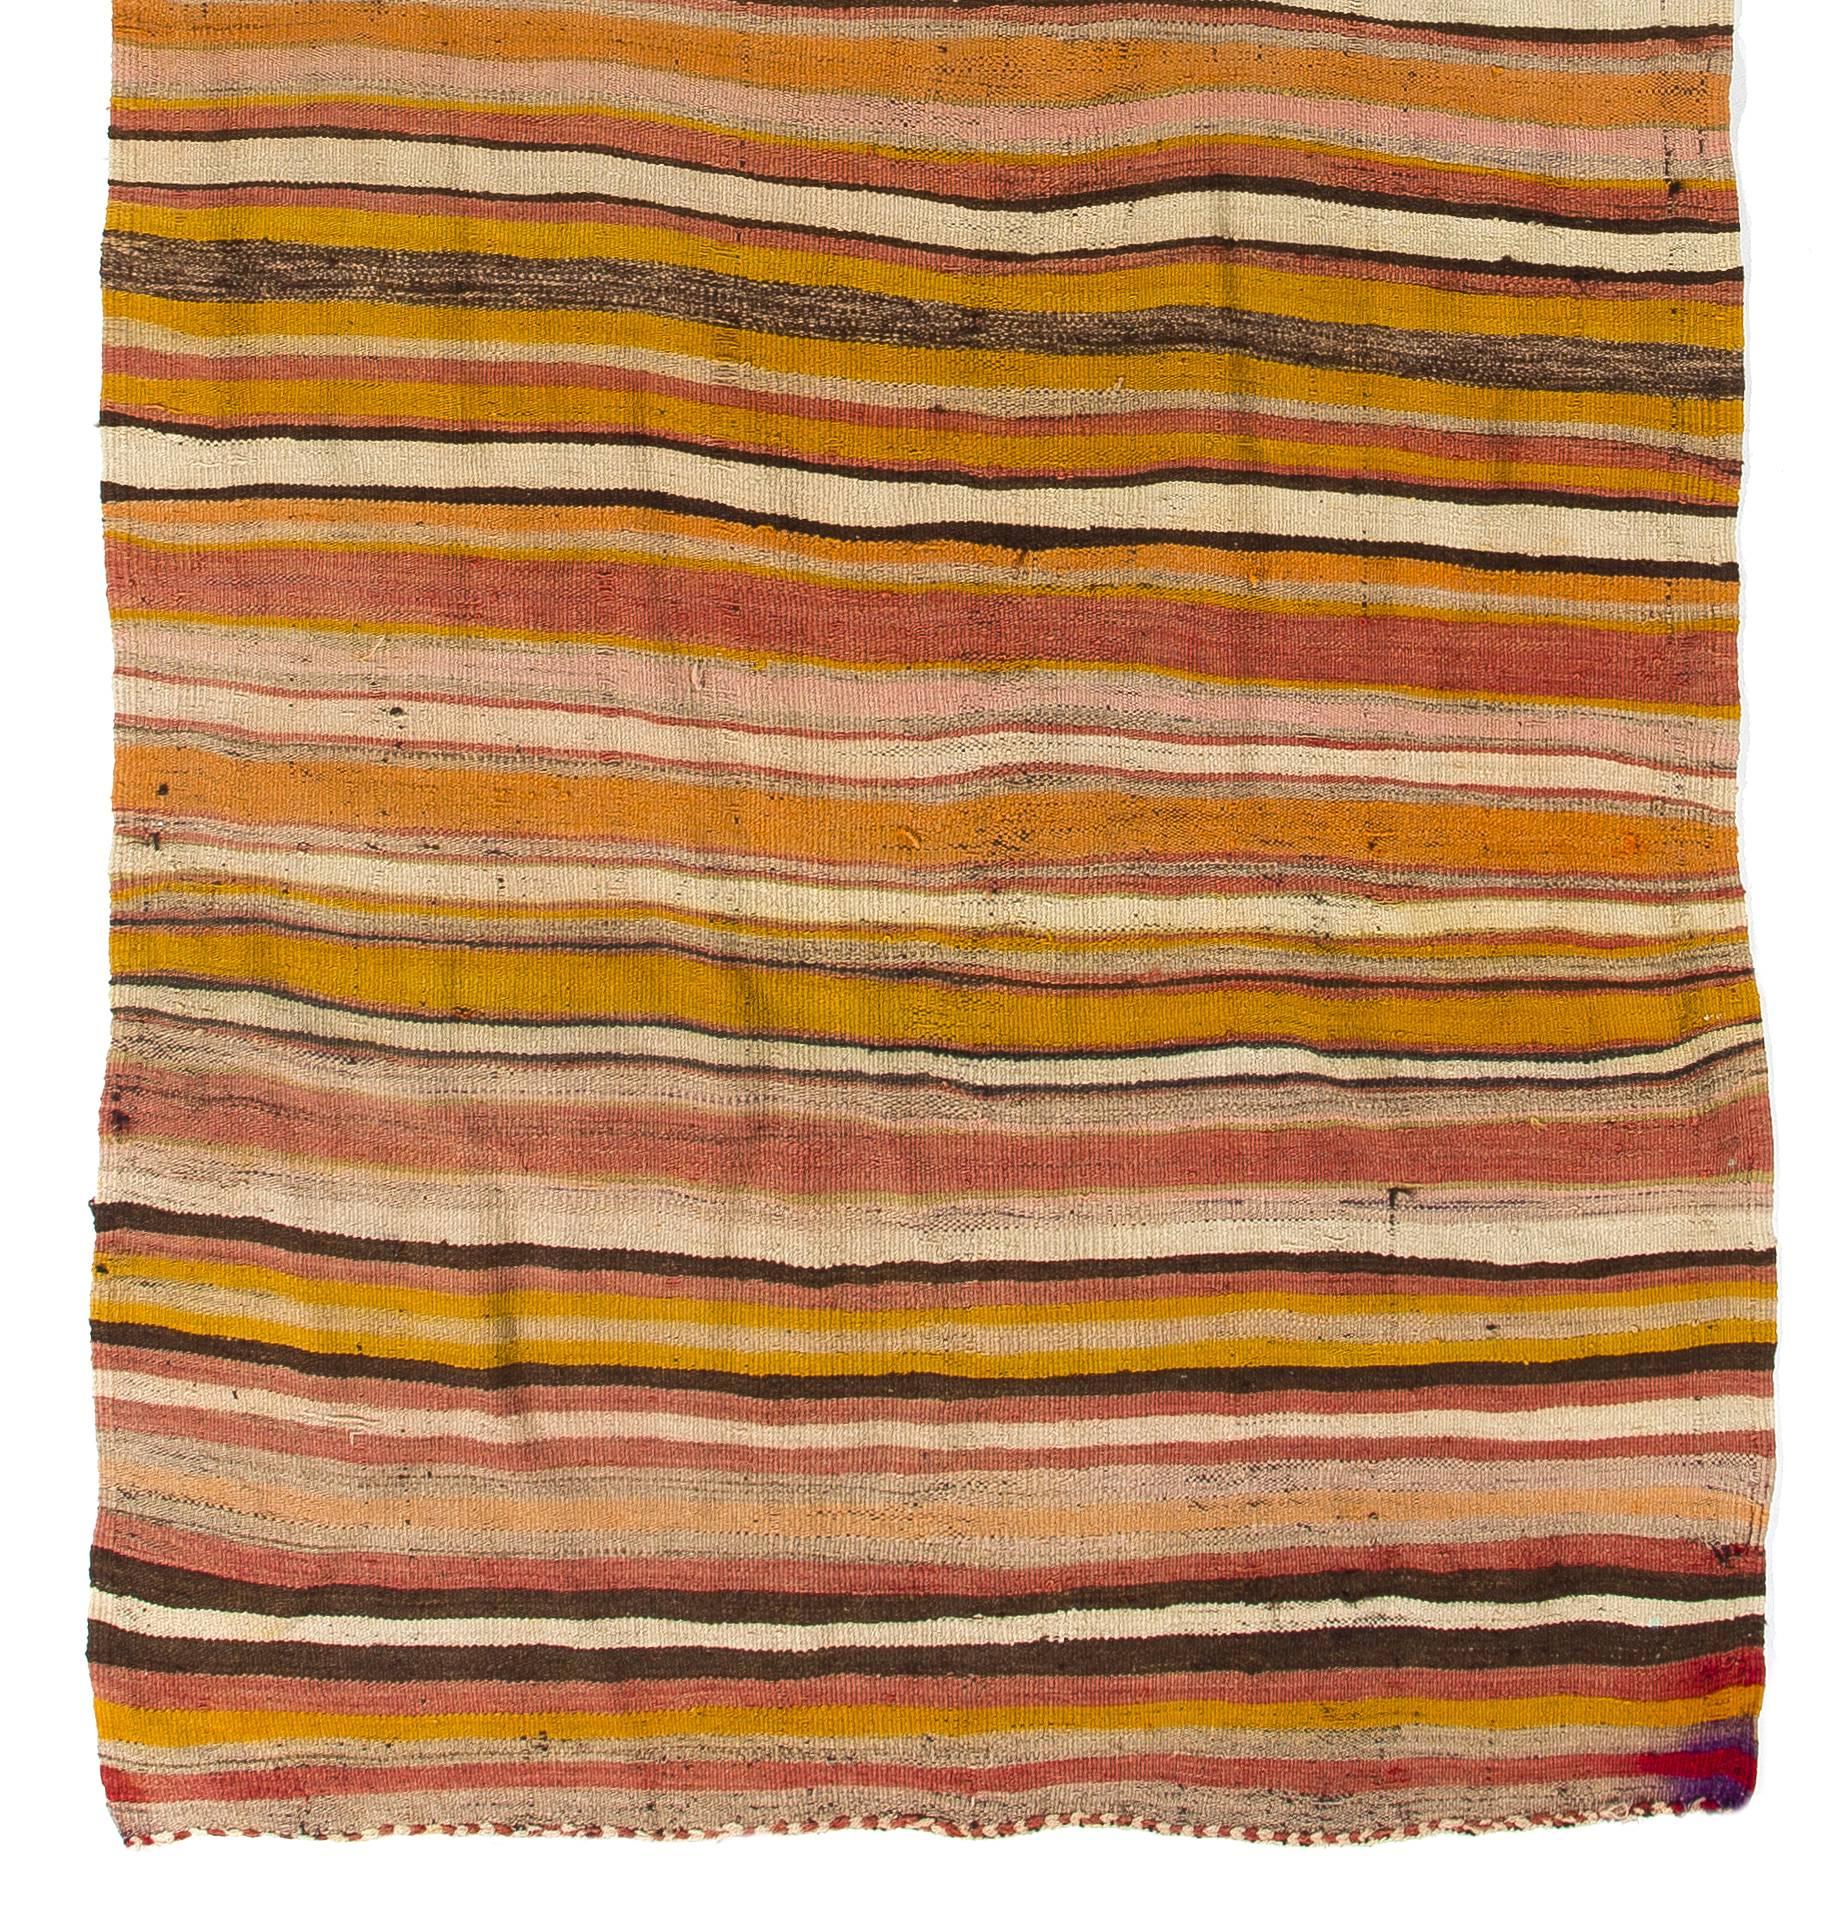 An authentic vintage hand-woven flat-weave (Kilim) rug from Central Turkey, made by the people of this region with traditionally nomadic roots, to be used as floor coverings in tents or highland lodges in the 1960s. 100% Wool. This particular kilim